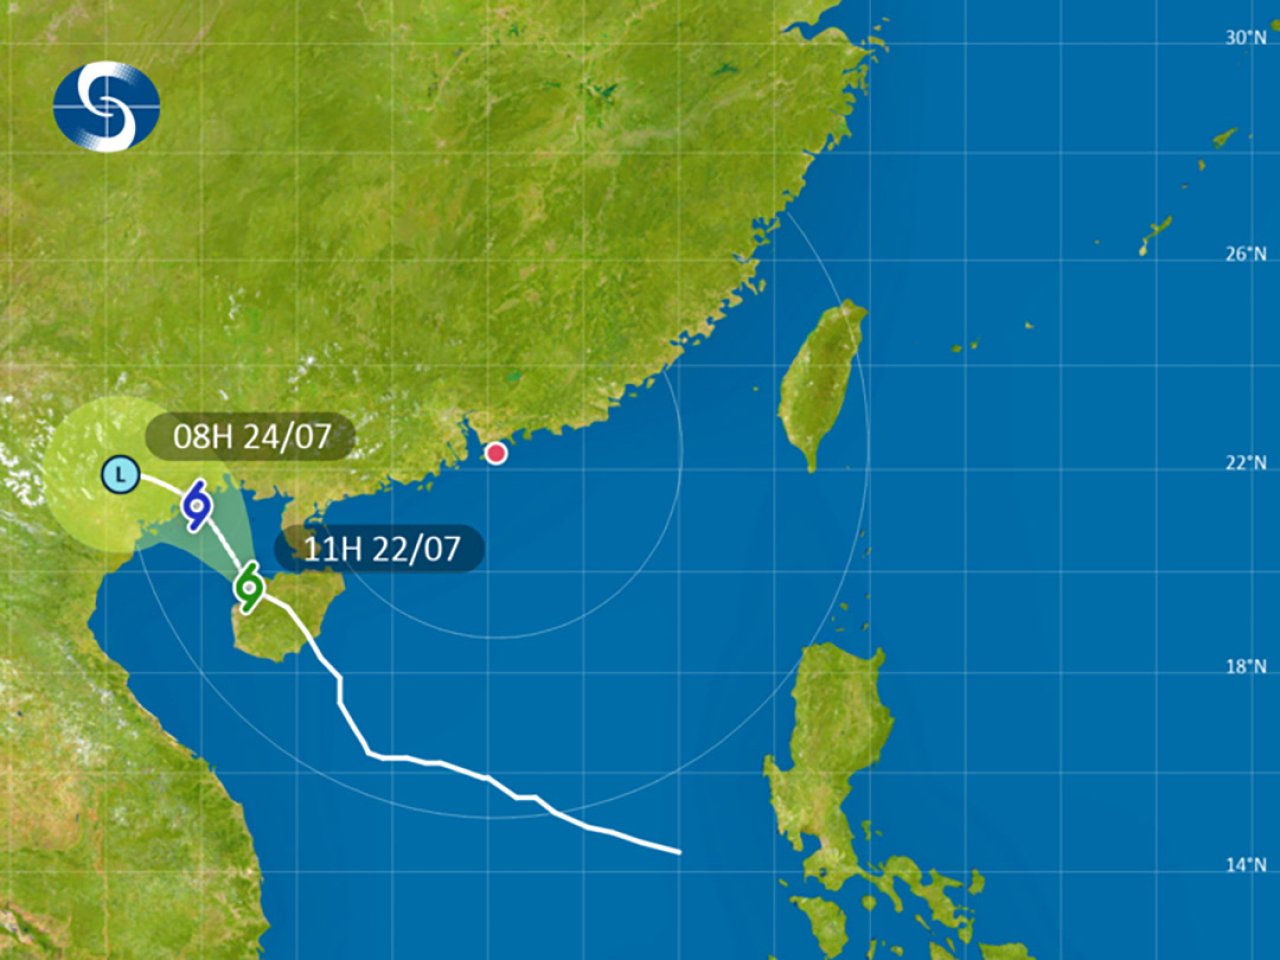 Standby signal cancelled as tropical storm moves away